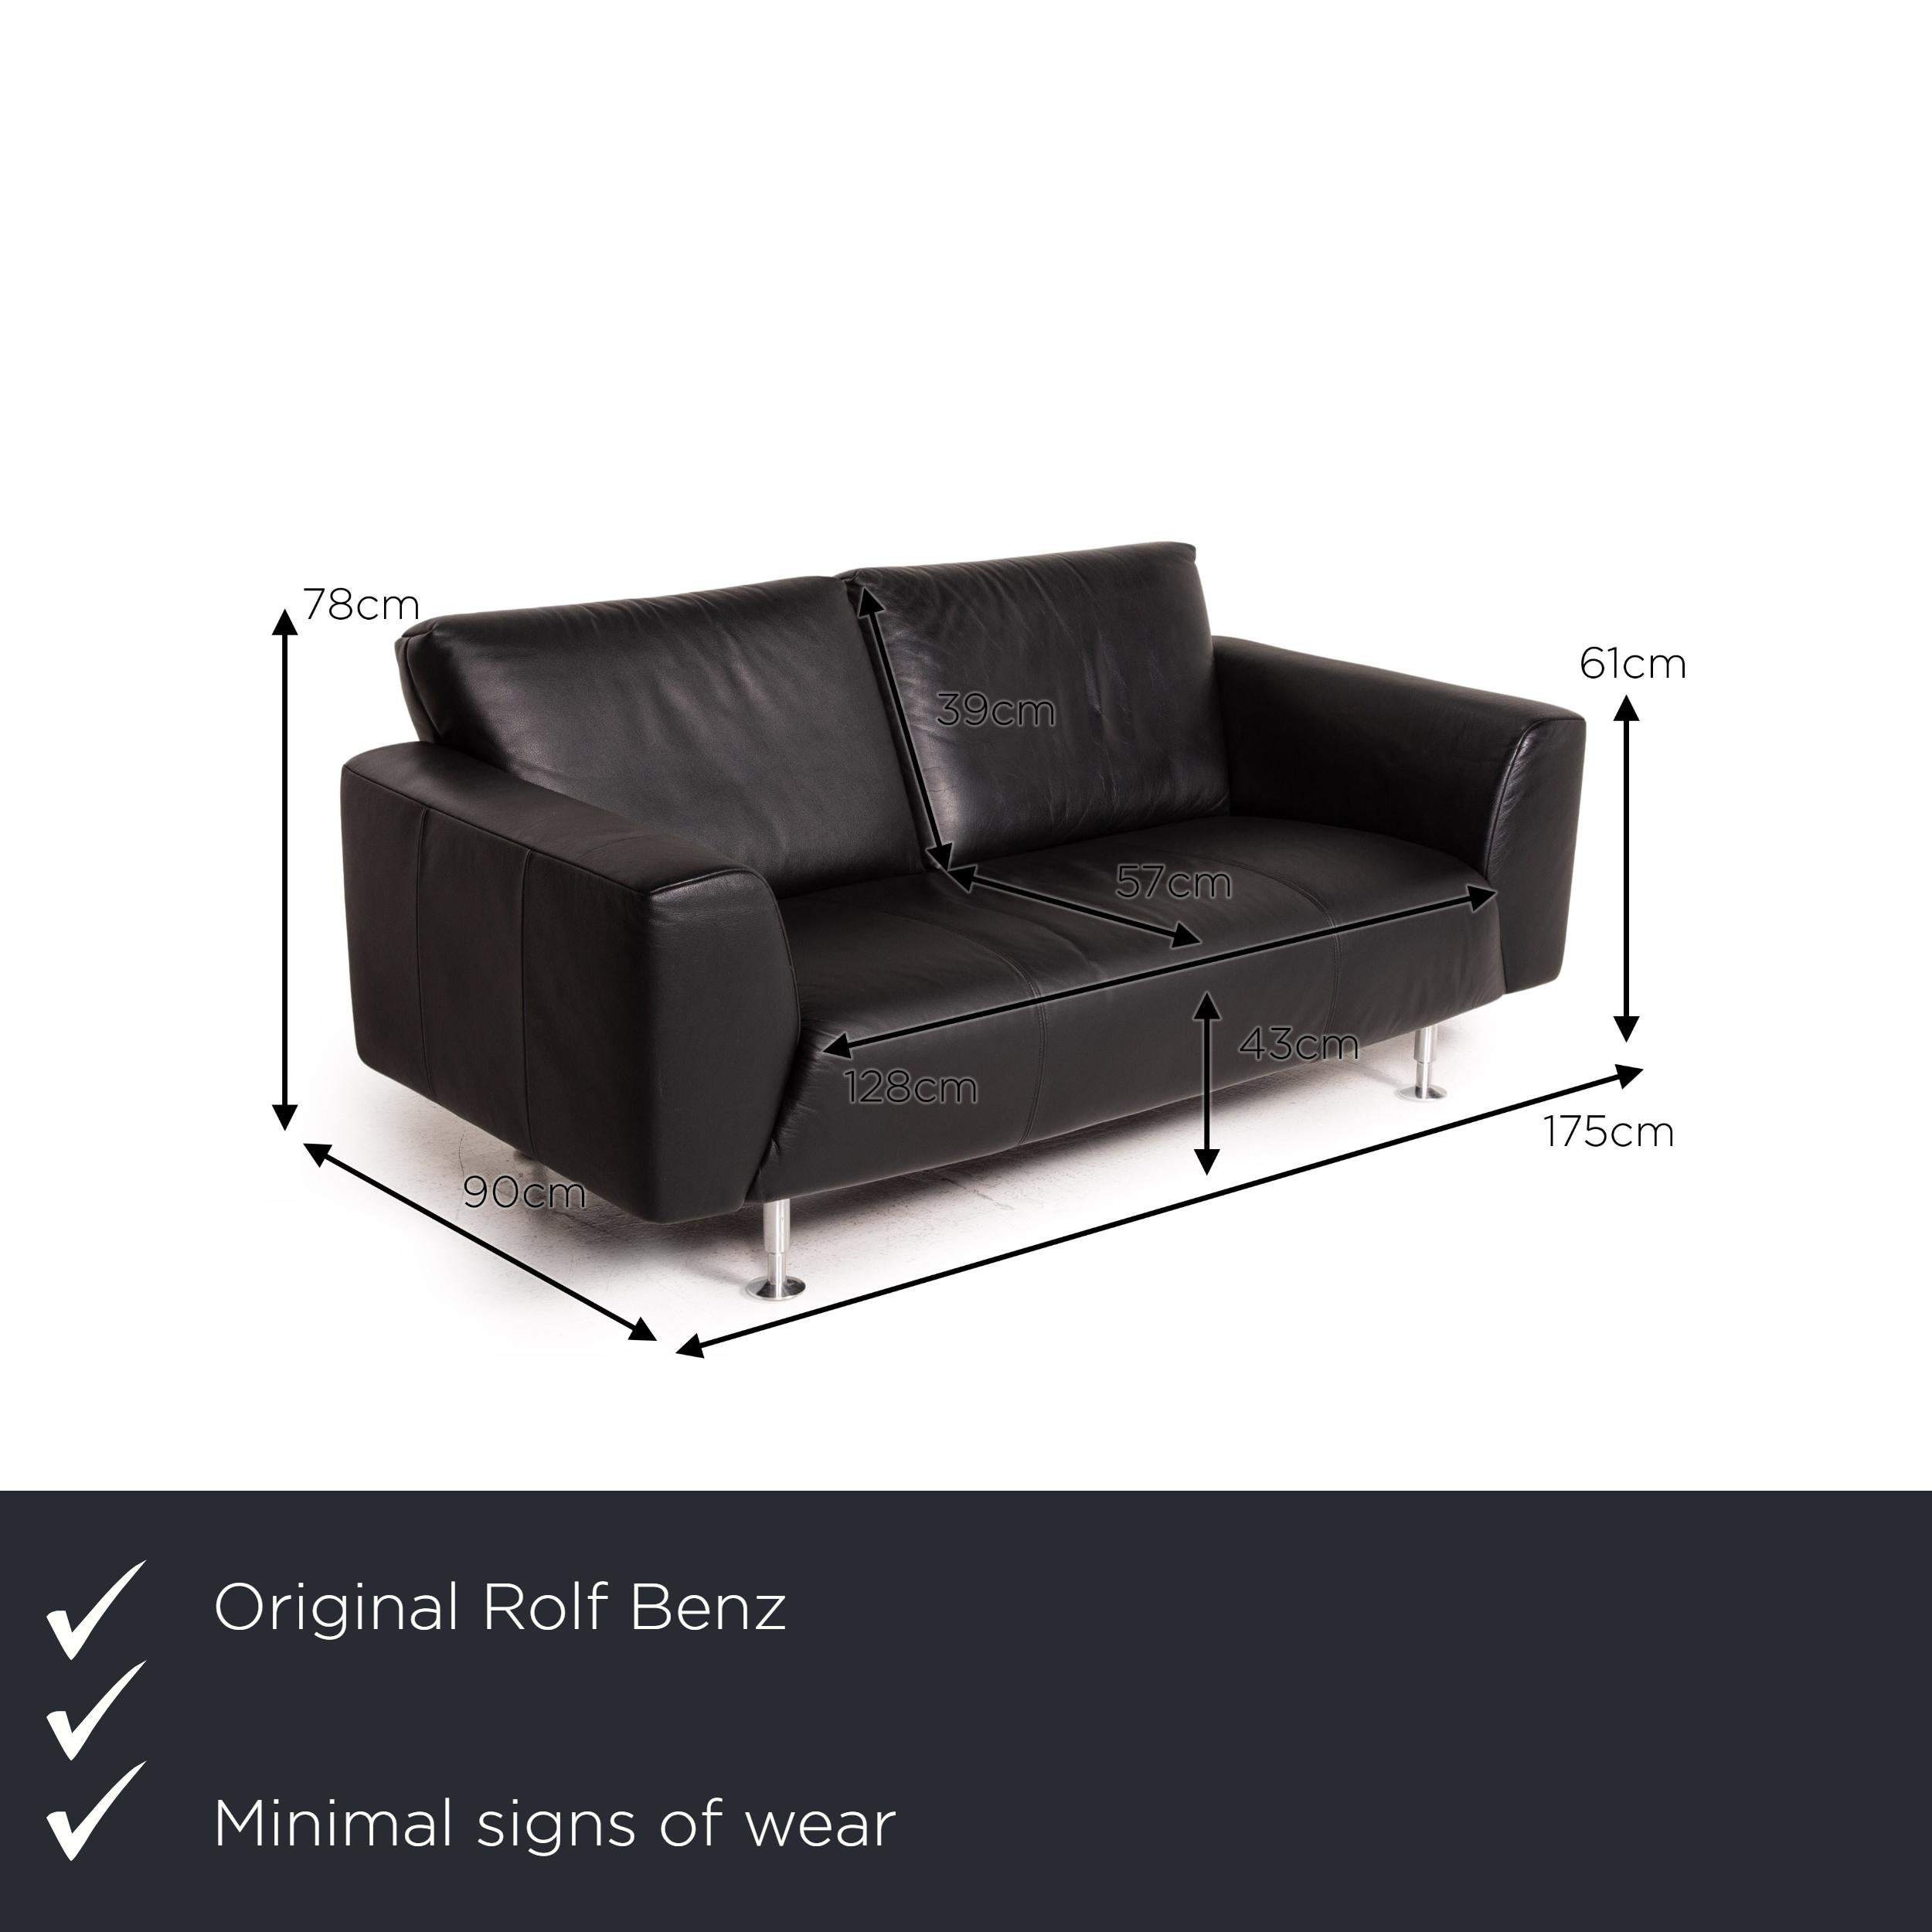 We present to you a Rolf Benz leather sofa black two-seater couch.


 Product measurements in centimeters:
 

Depth: 90
Width: 175
Height: 78
Seat height: 43
Rest height: 61
Seat depth: 57
Seat width: 128
Back height: 39.
 